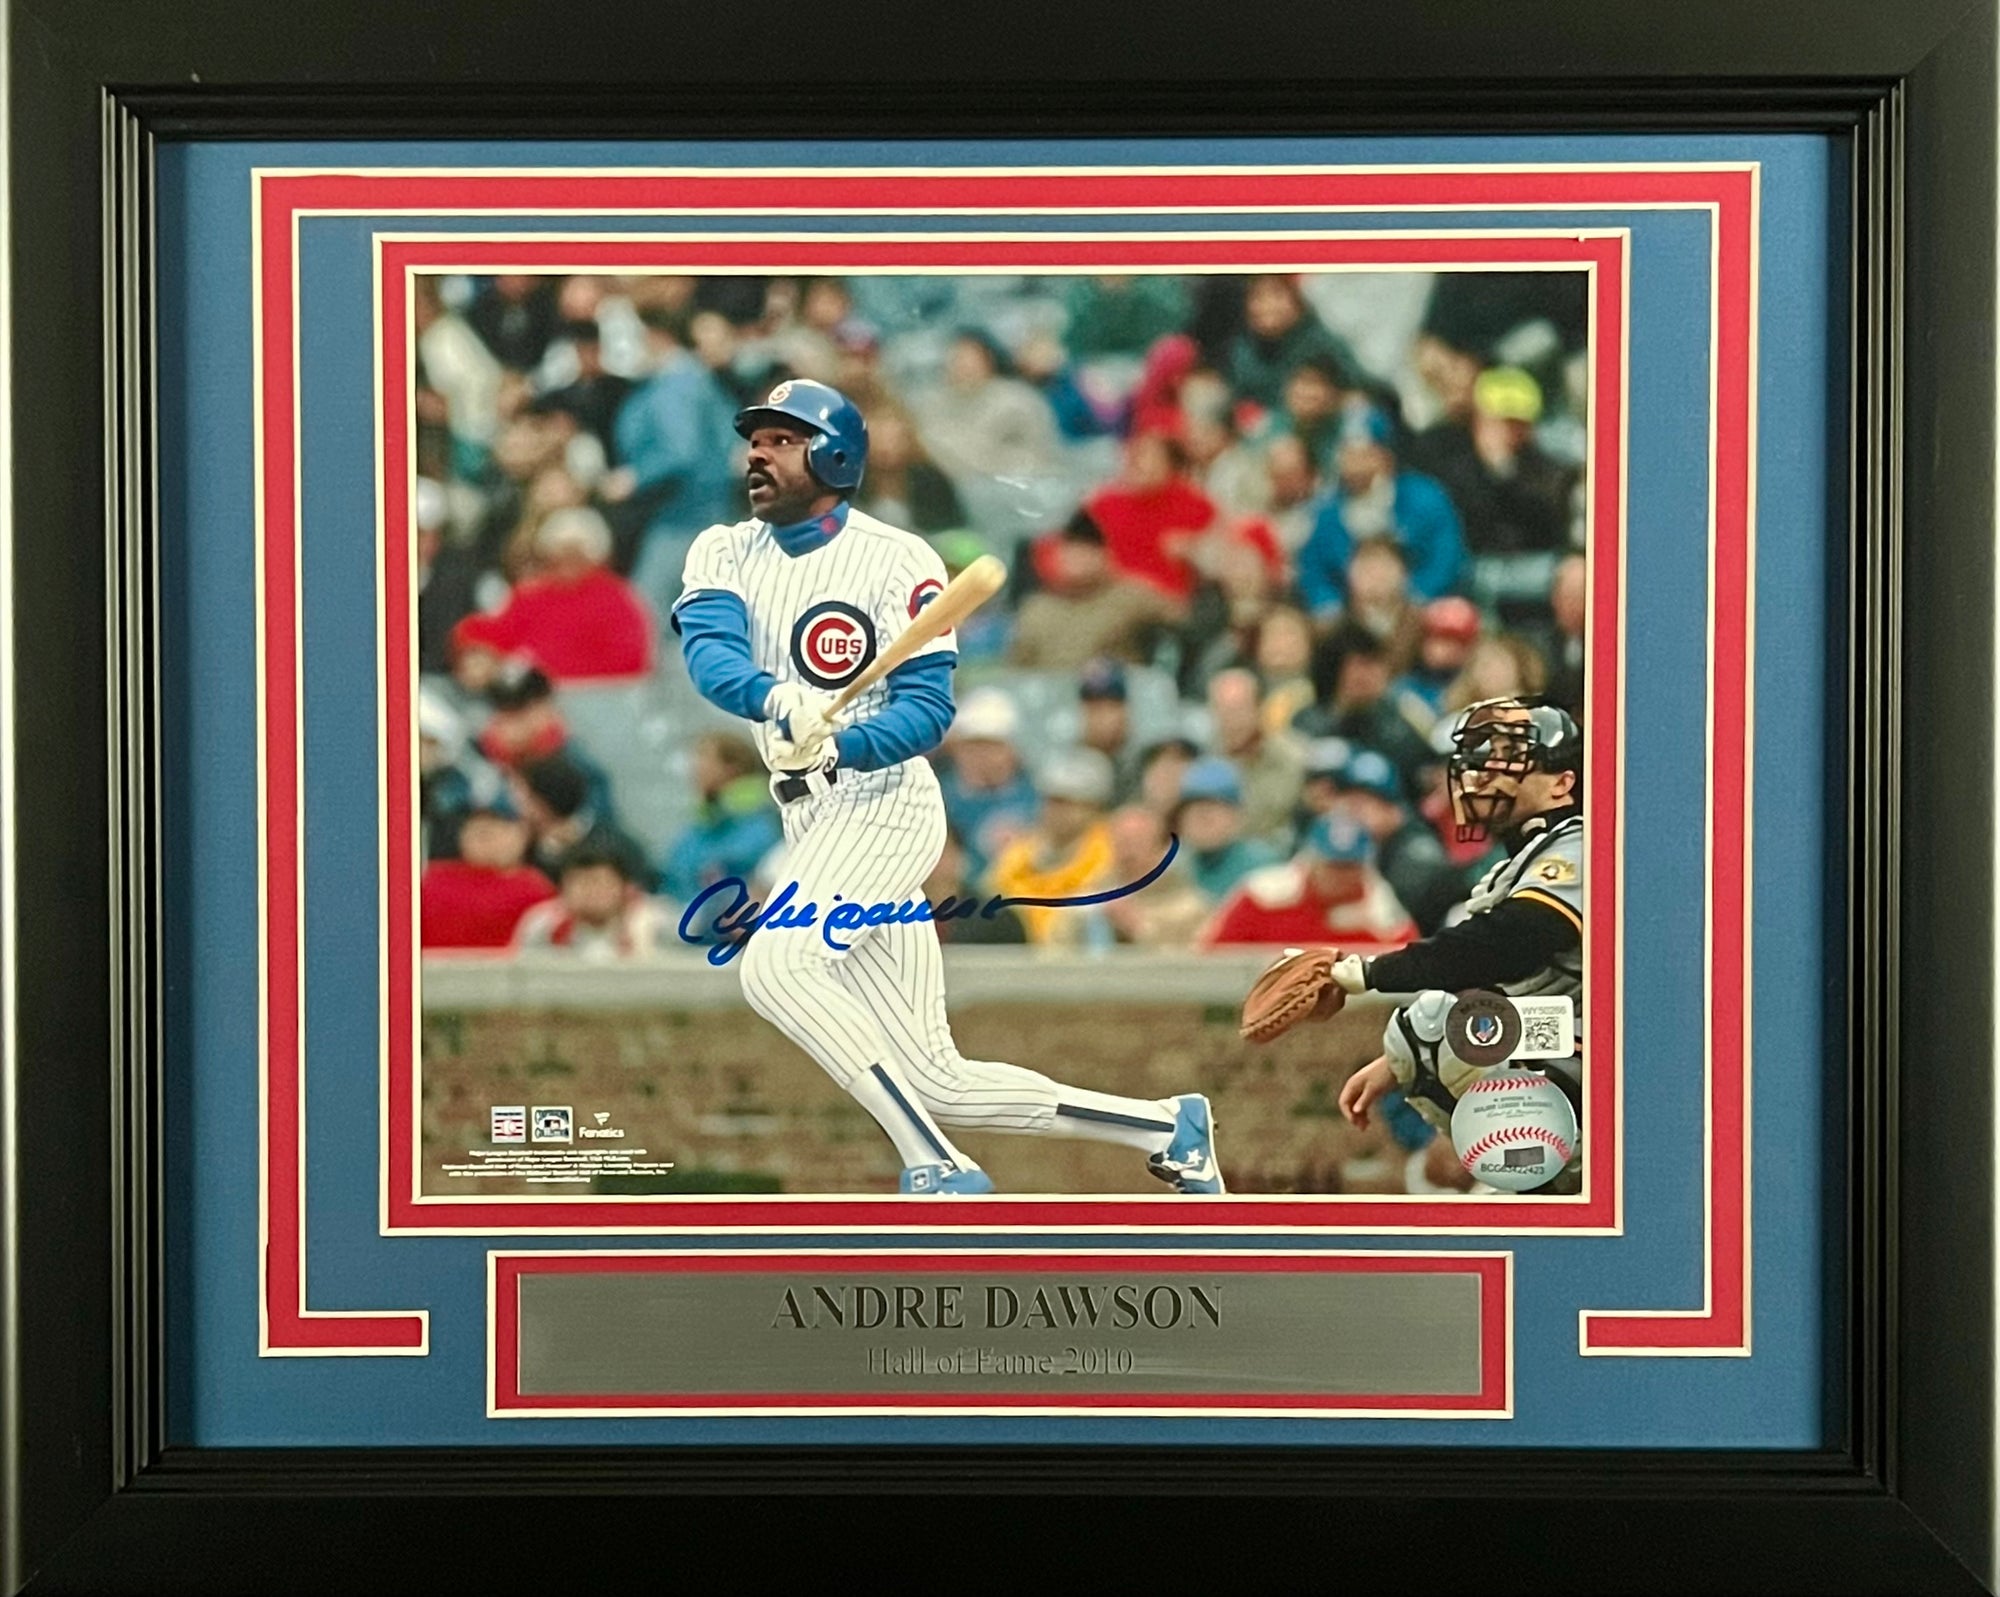 Andre Dawson Chicago Cubs Autographed 8x10 Photo Framed